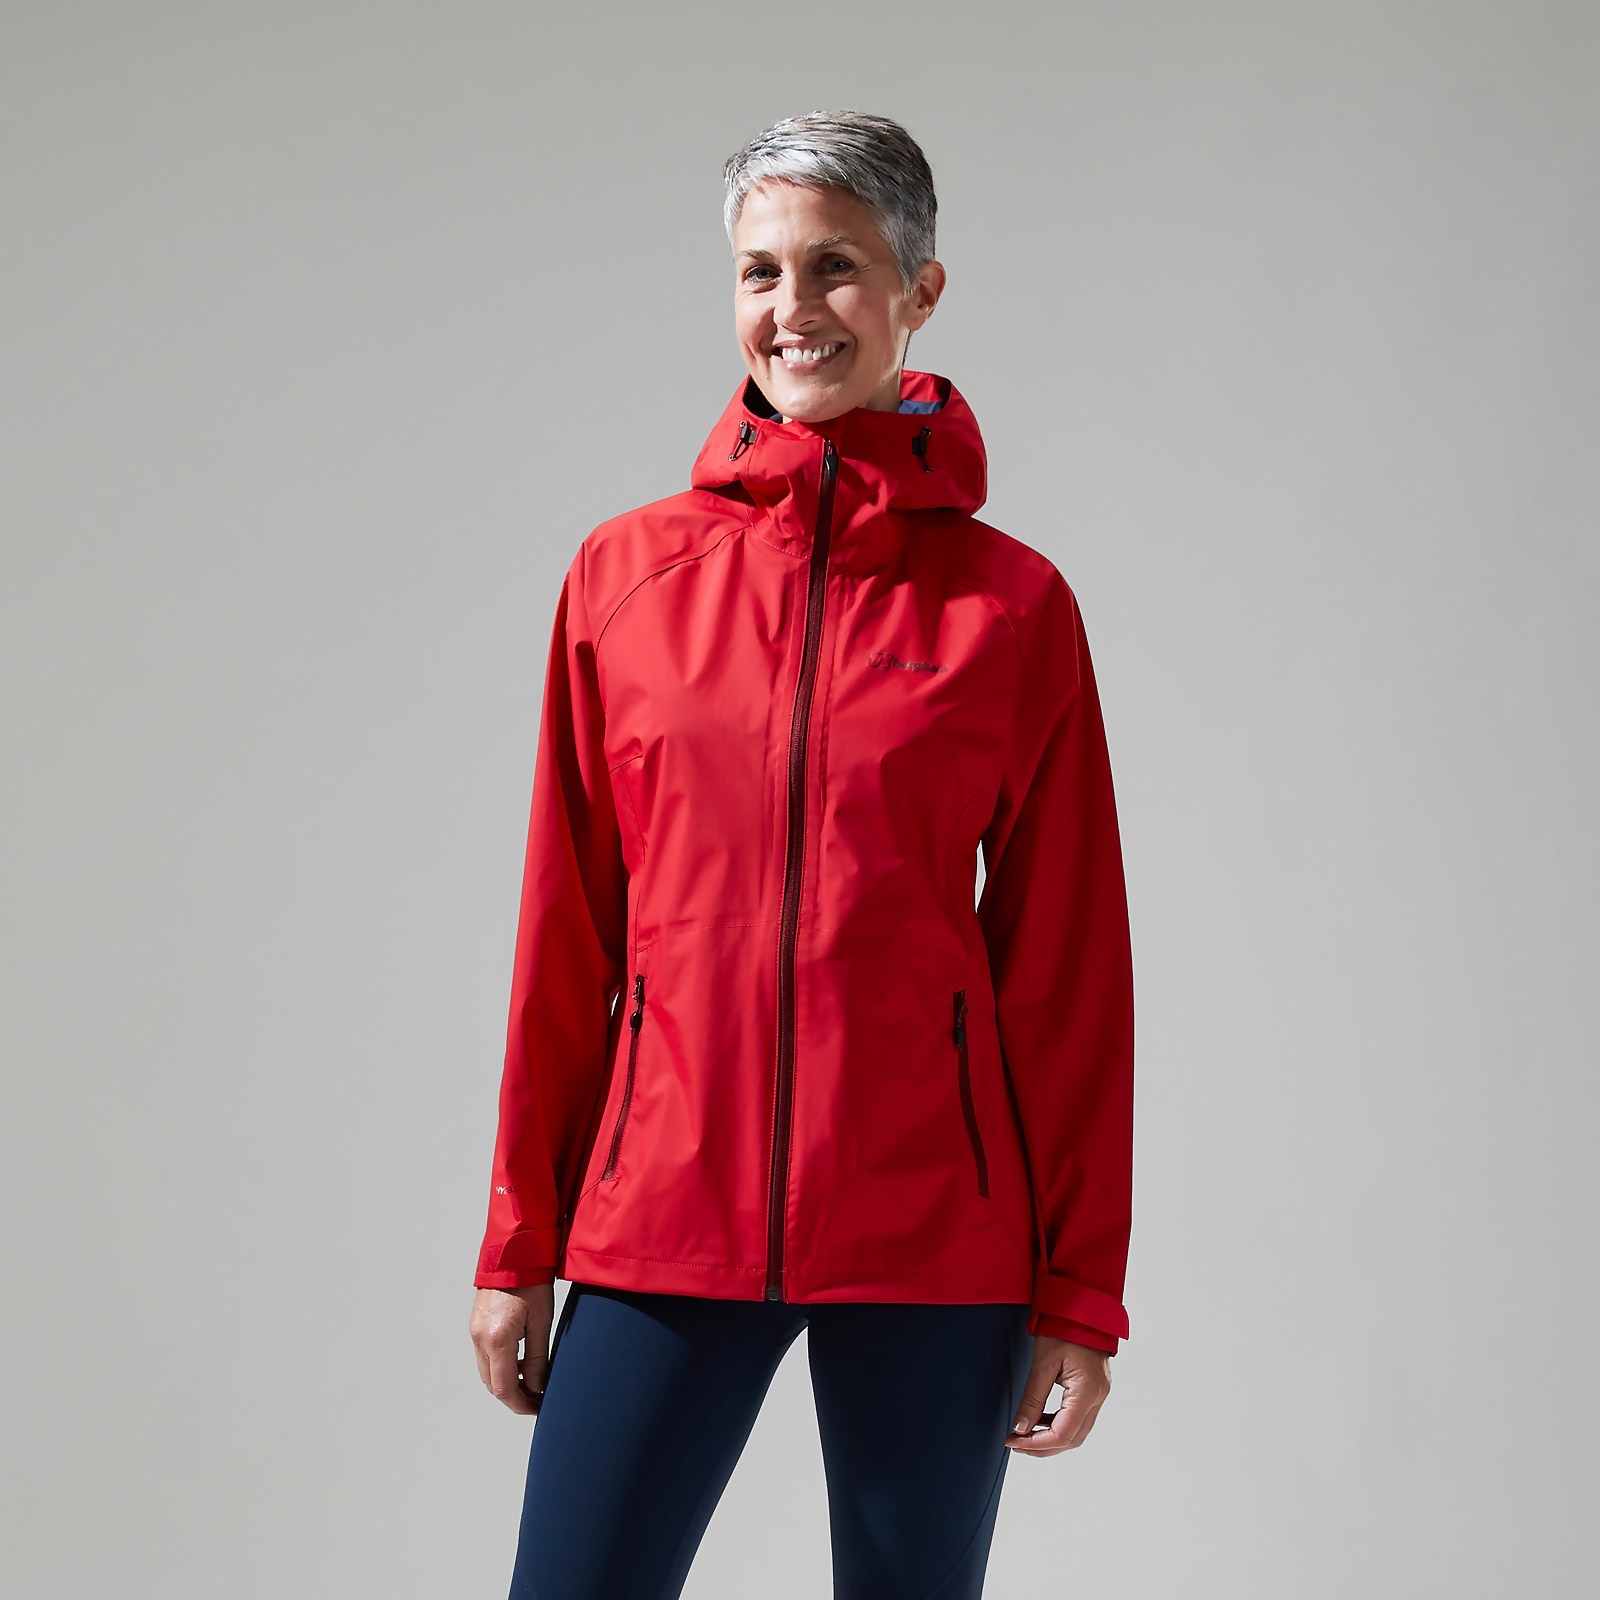 Berghaus Womens Deluge Pro Jacket - Red